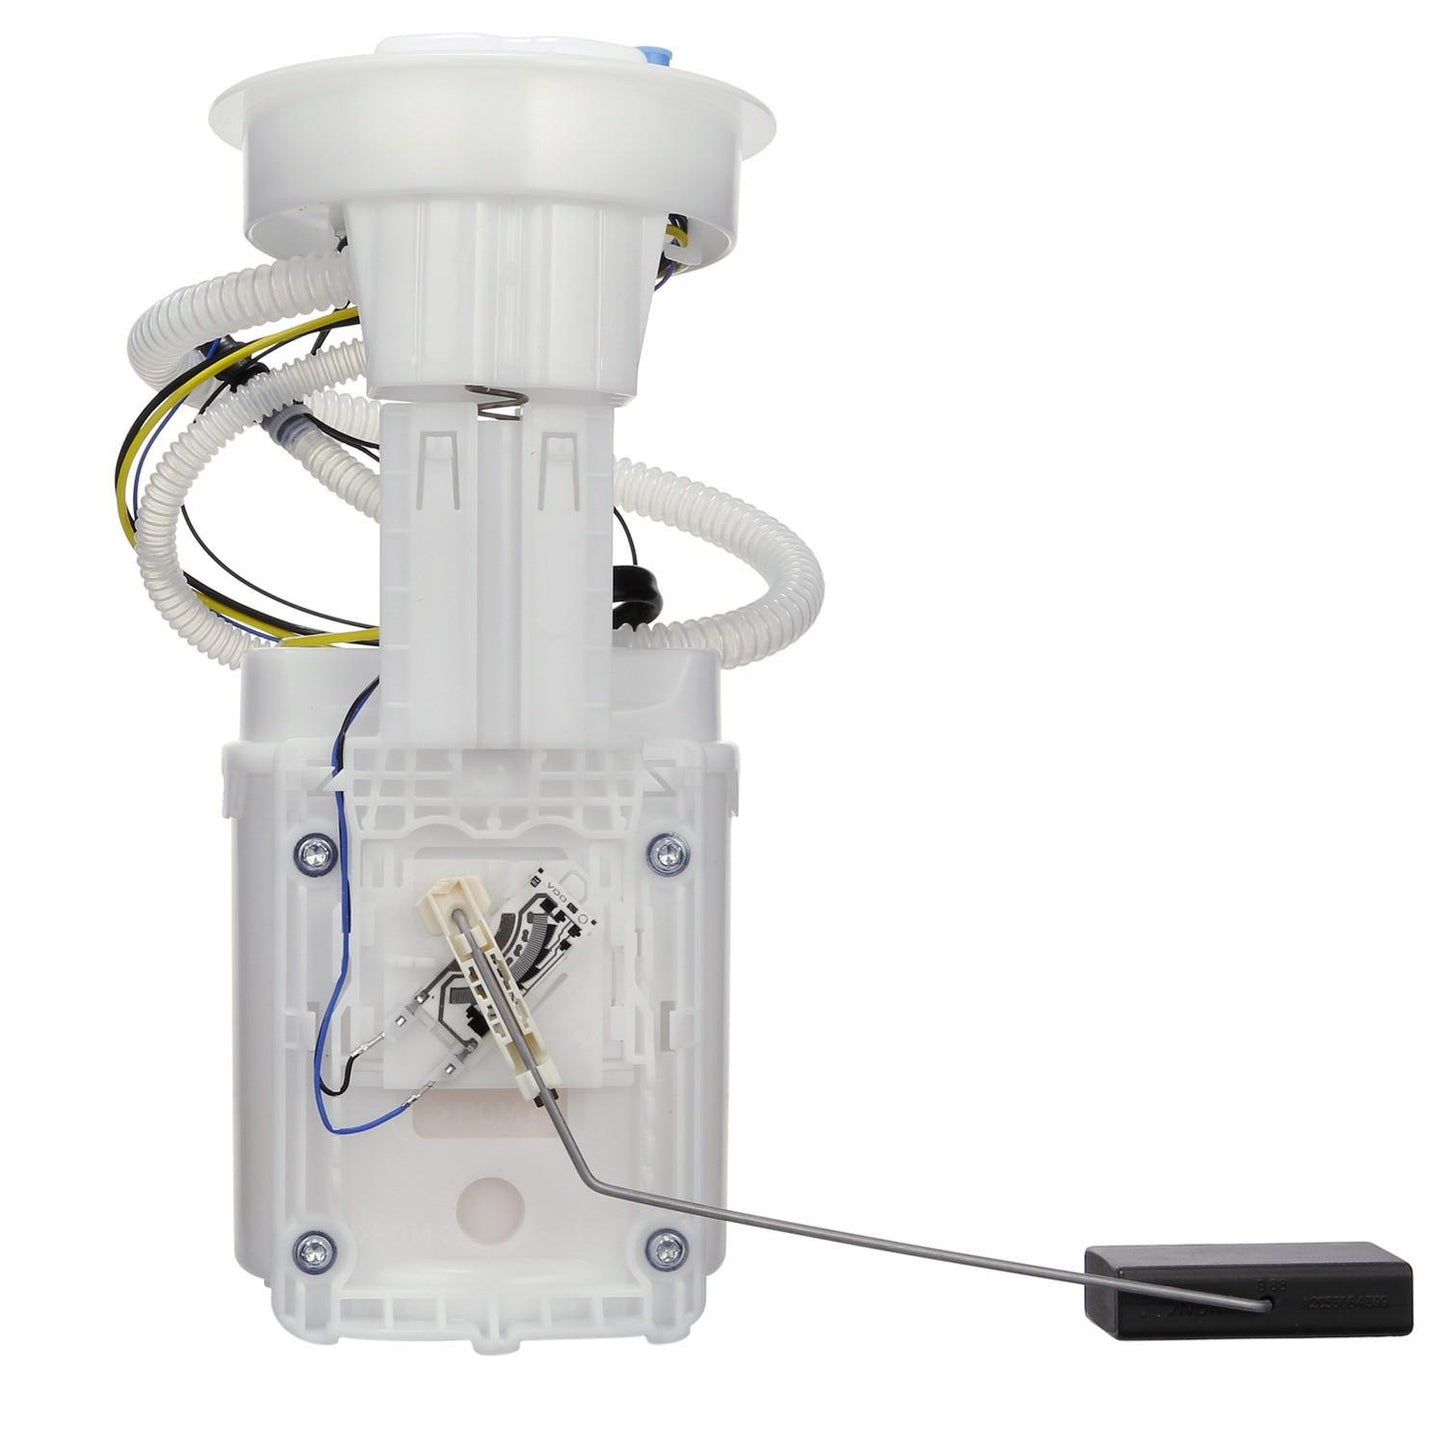 Back View of Right Fuel Pump Module Assembly DELPHI FG1410